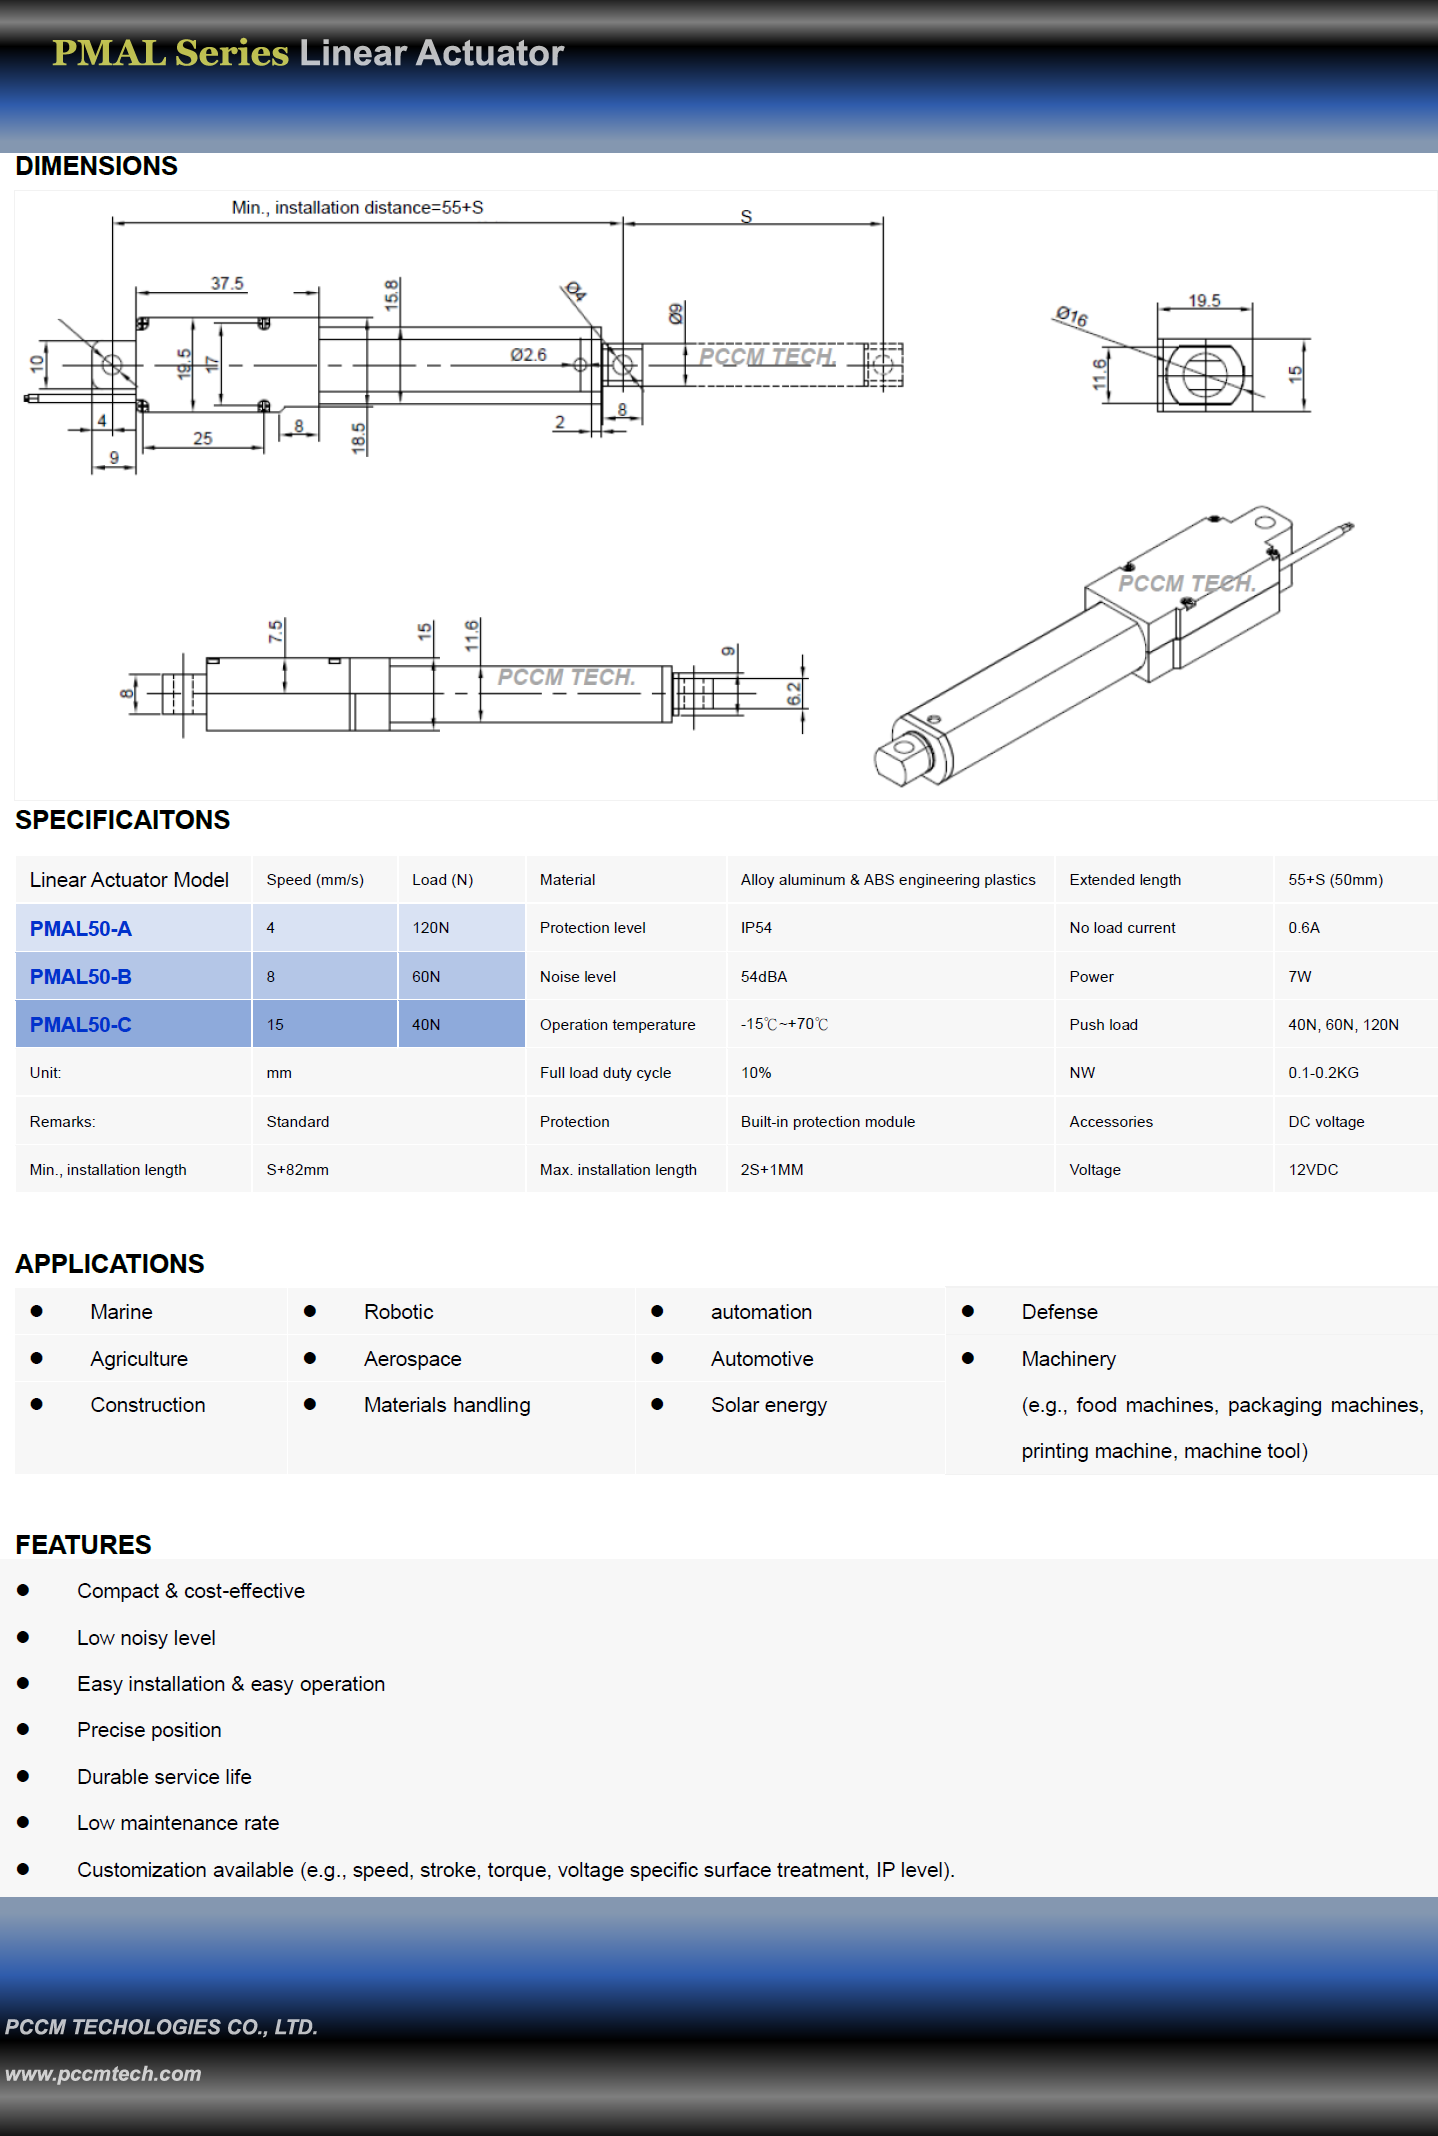 PMAL SERIES LINEAR ACTUATOR SPECIFICATIONS DIMENSIONS APPLICATIONS FEATURES PCCM TECH